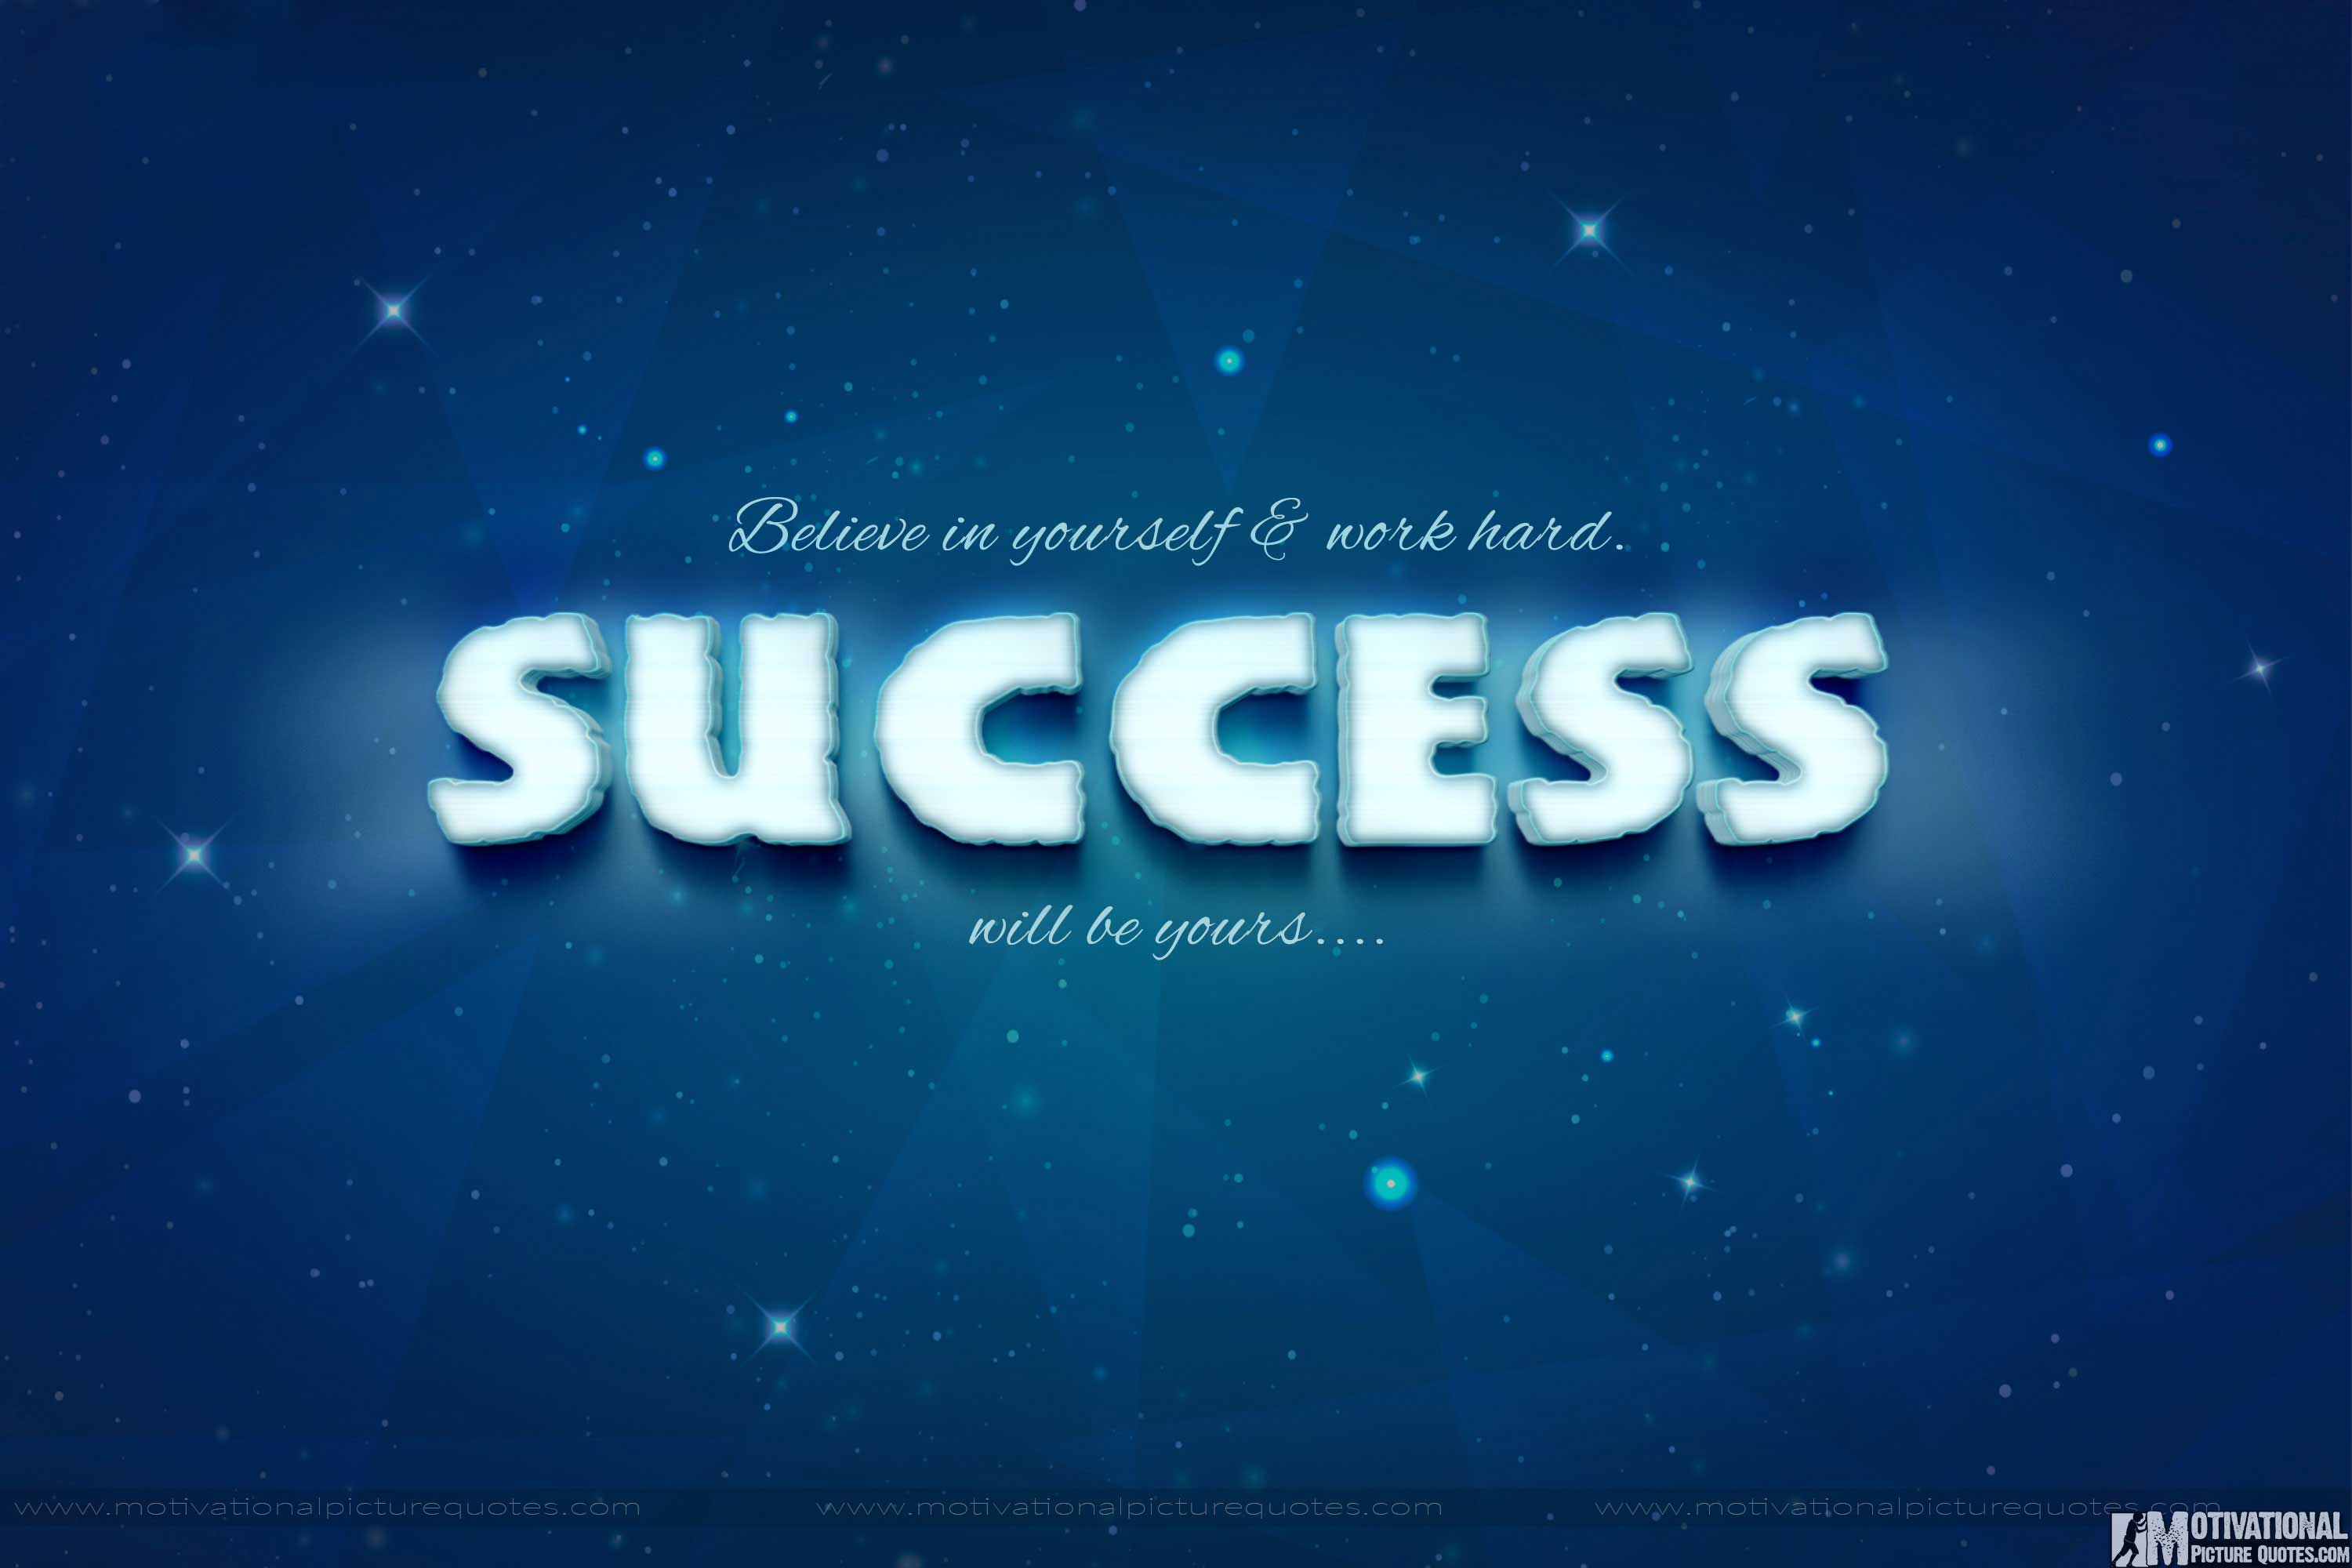 Motivational Success Wallpapers HD For Free Download | Insbright